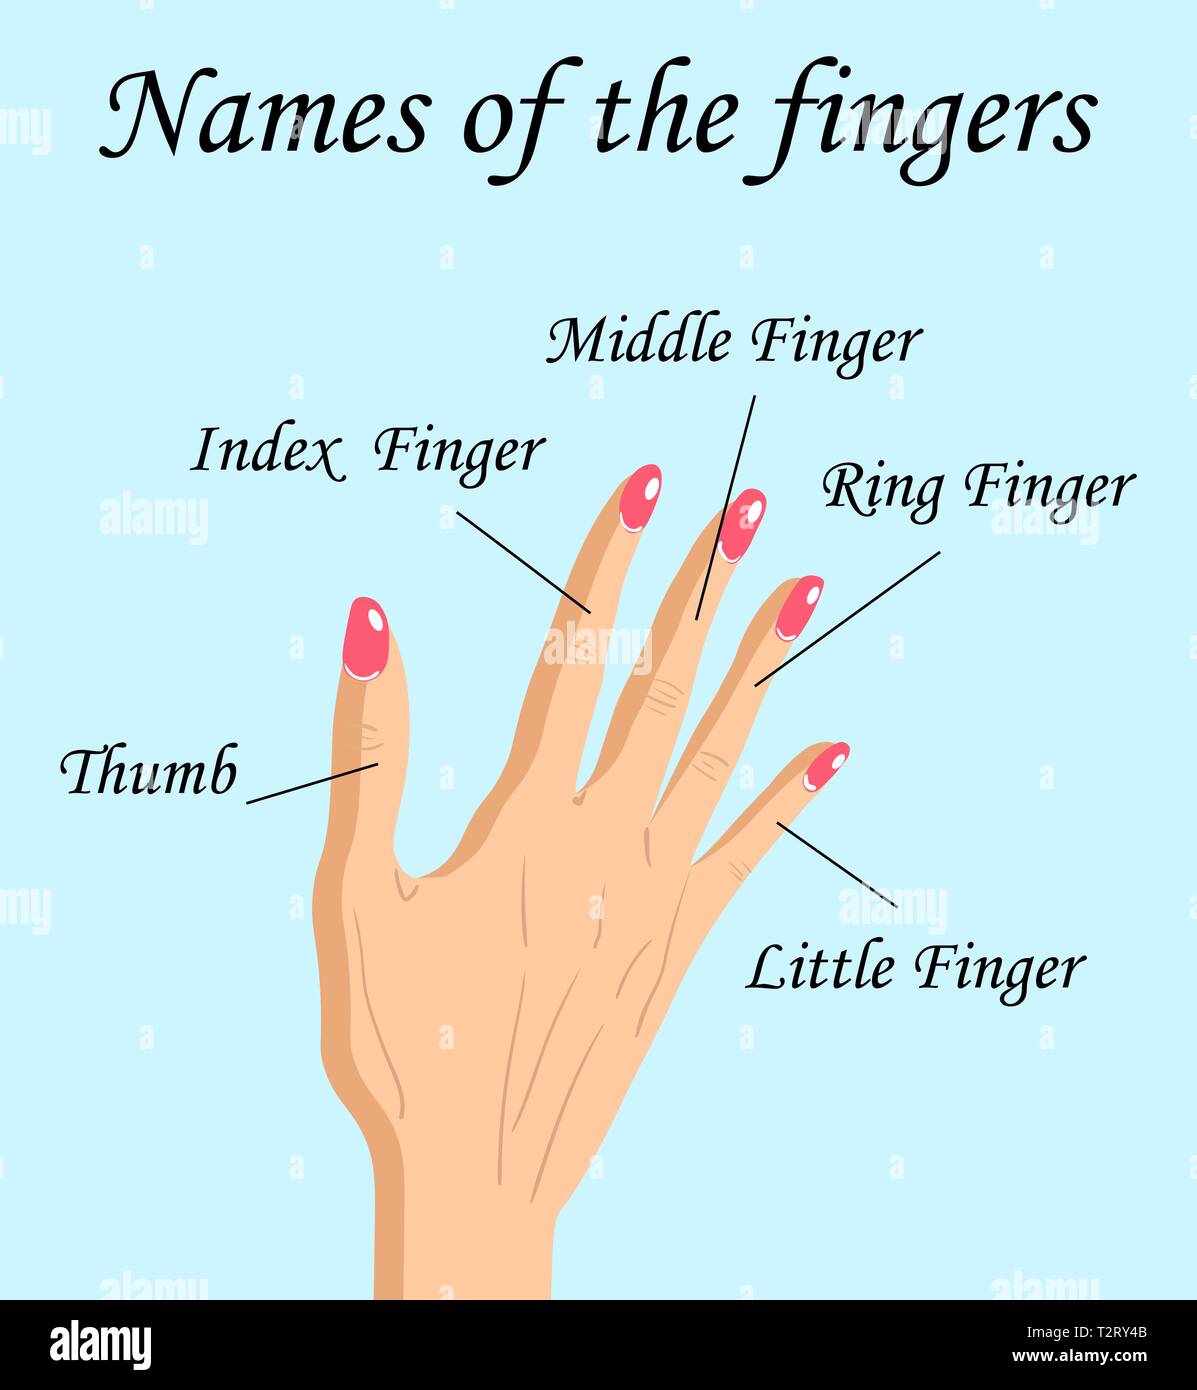 Fingers Names Of Human Body Parts A Hand Drawn Vector Cartoon Illustration Of Human Fingers And Its Names Stock Vector Image Art Alamy